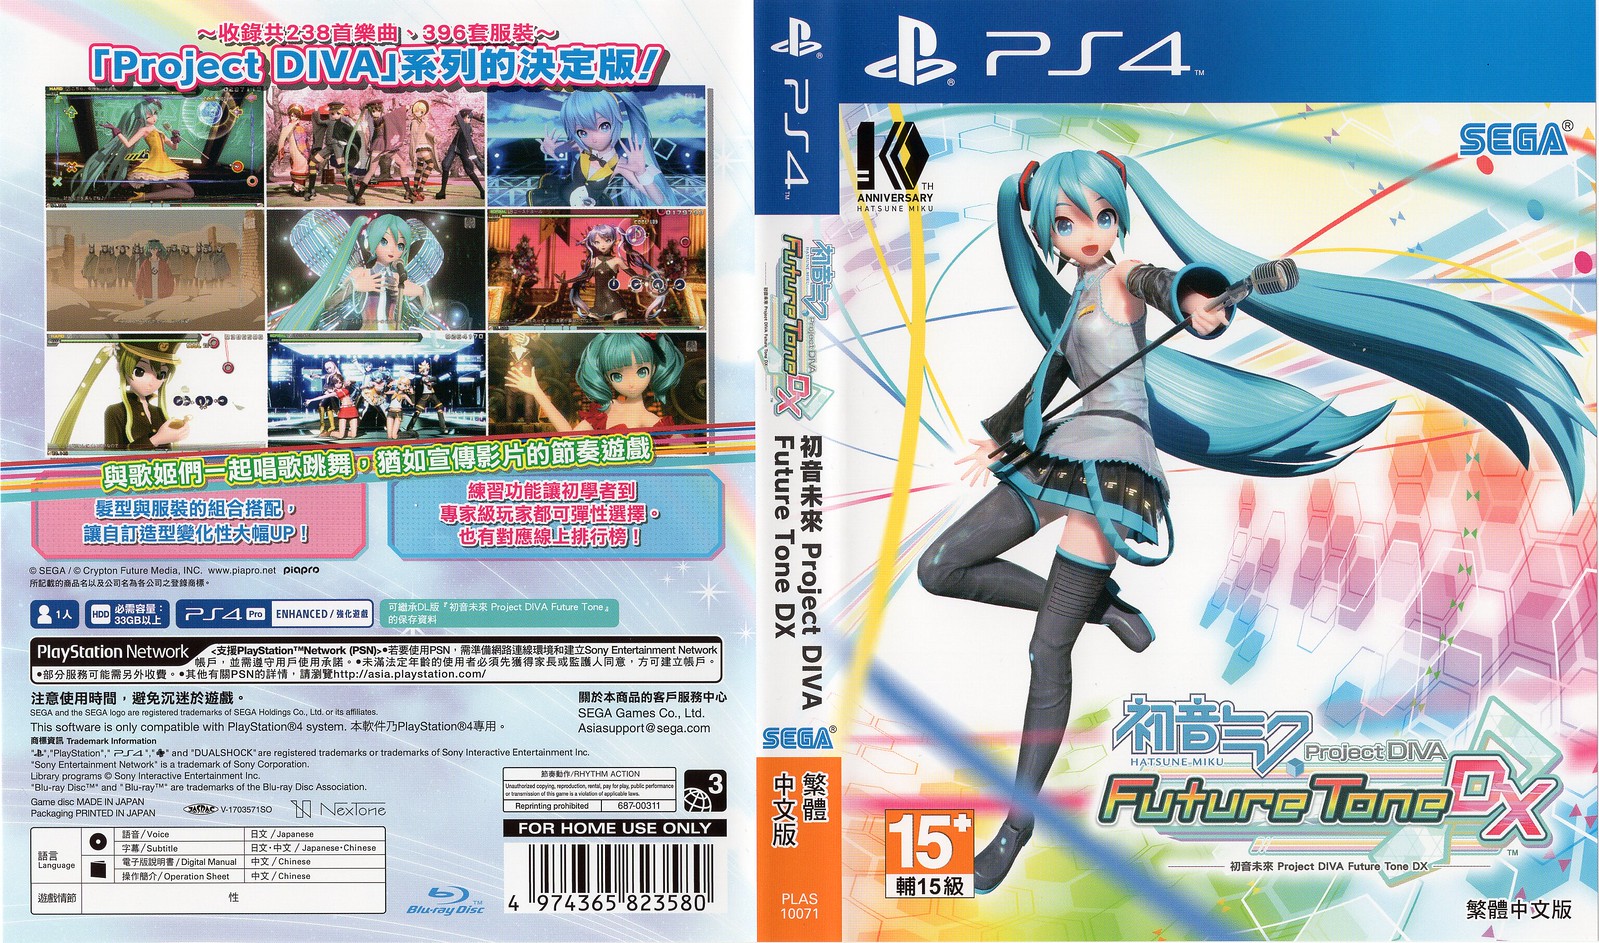 PS4 初音ミク -Project DIVA- Future Tone DX Cover | wishcarole | Flickr